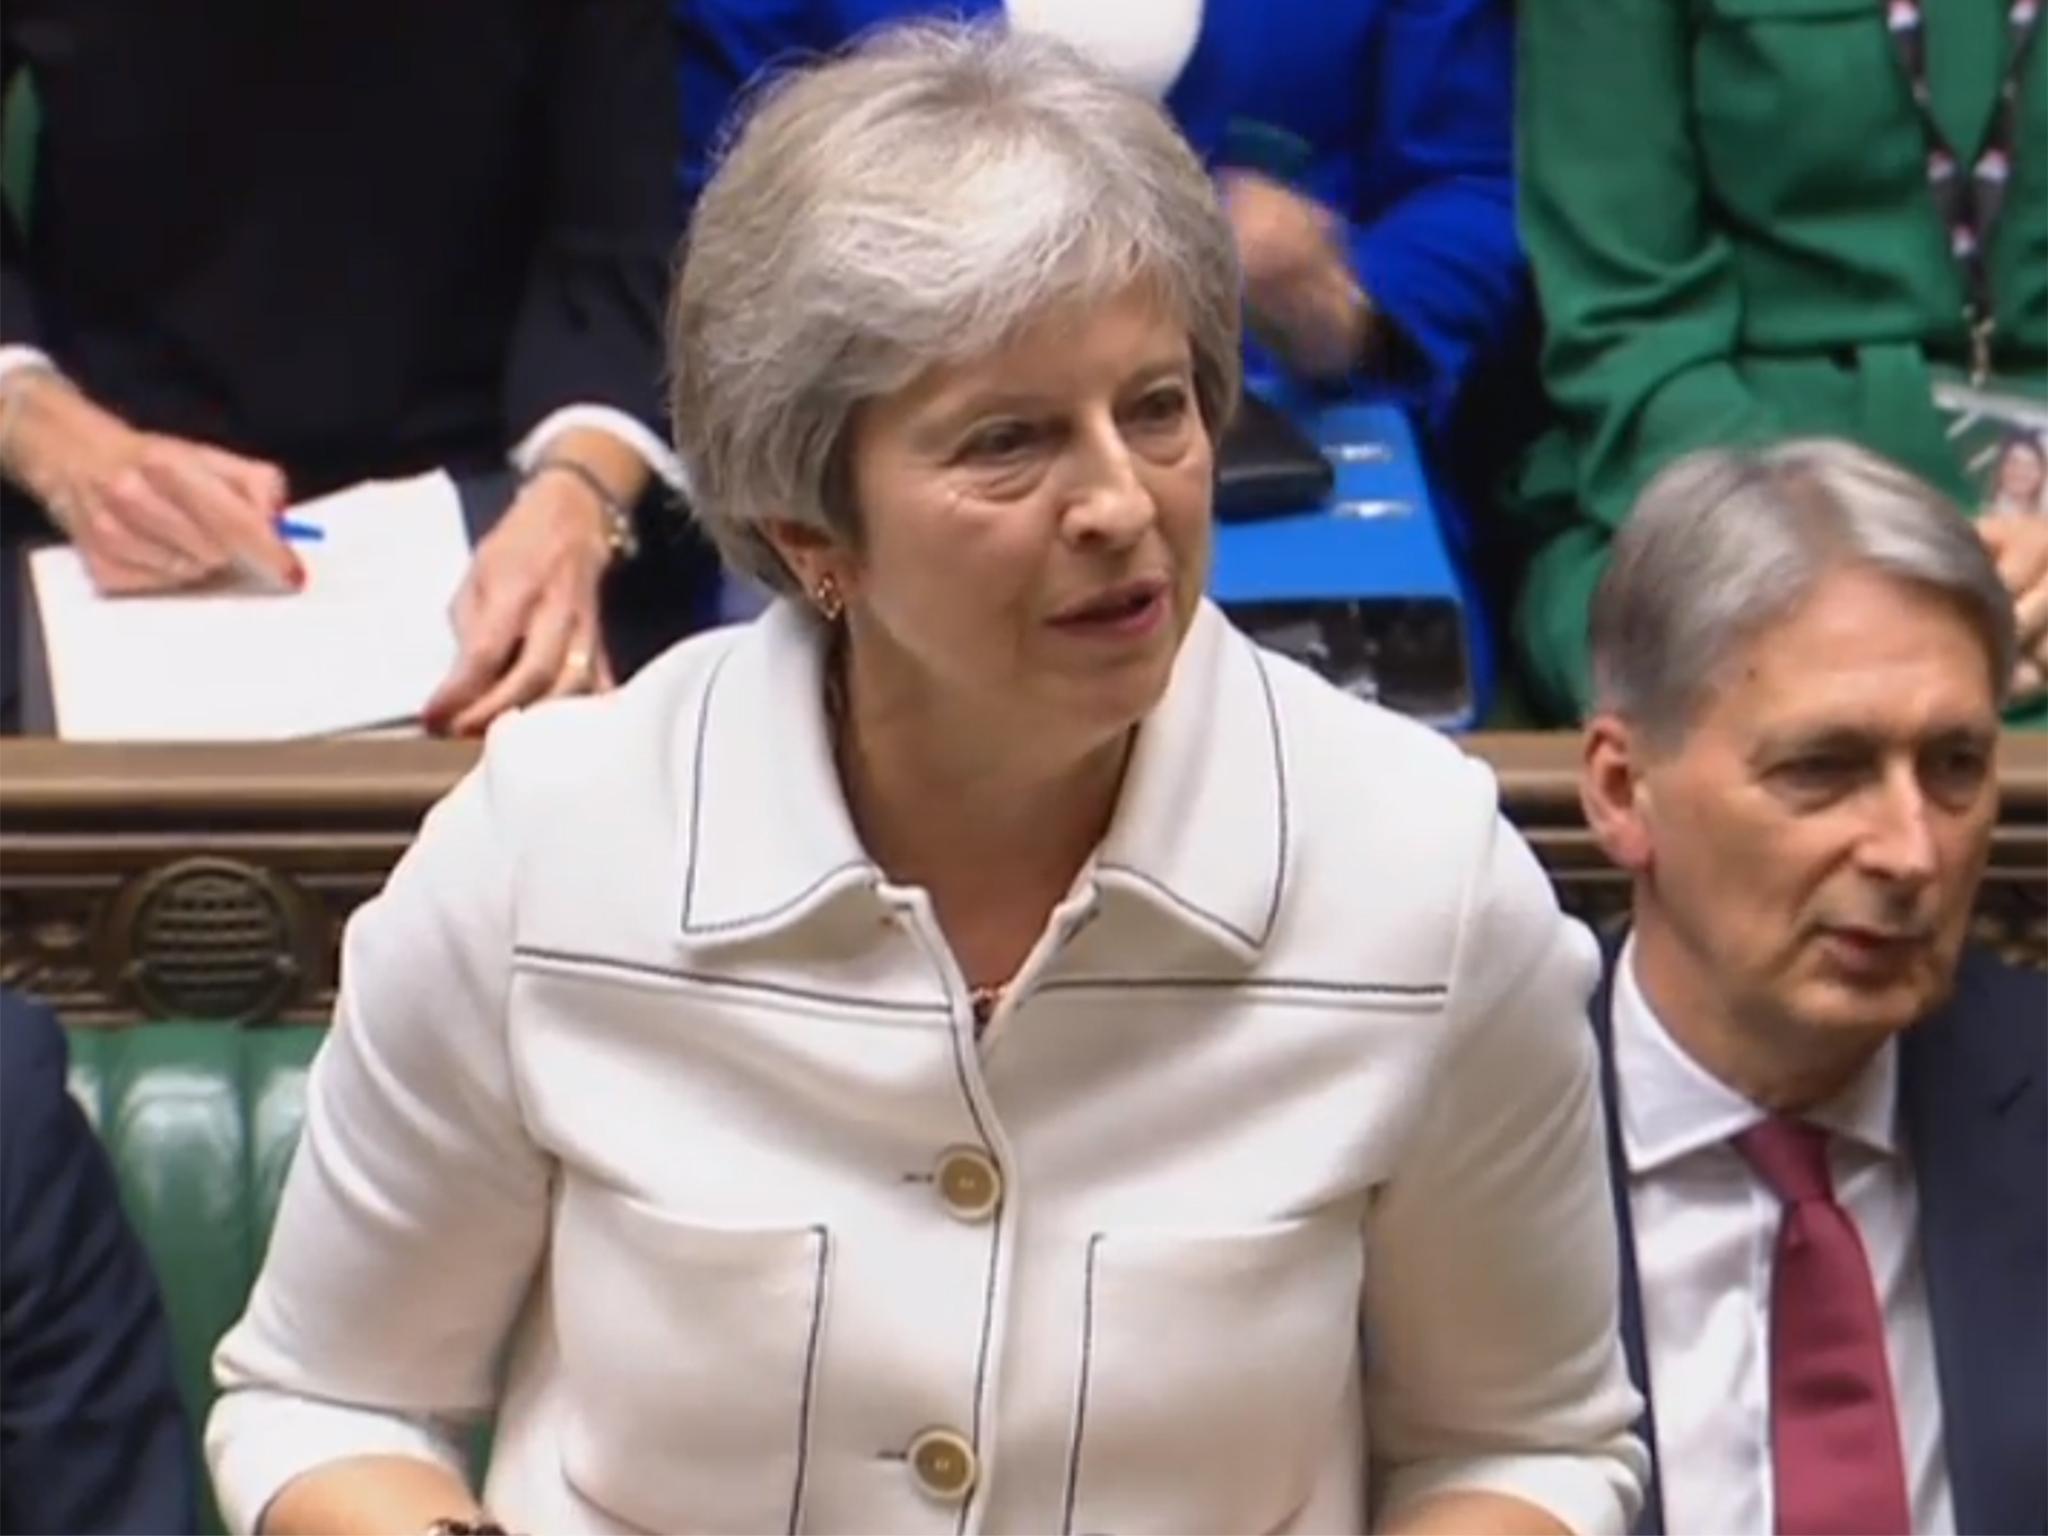 Brexit news: Theresa May gives statement to MPs after Brussels talks hit deadlock ...